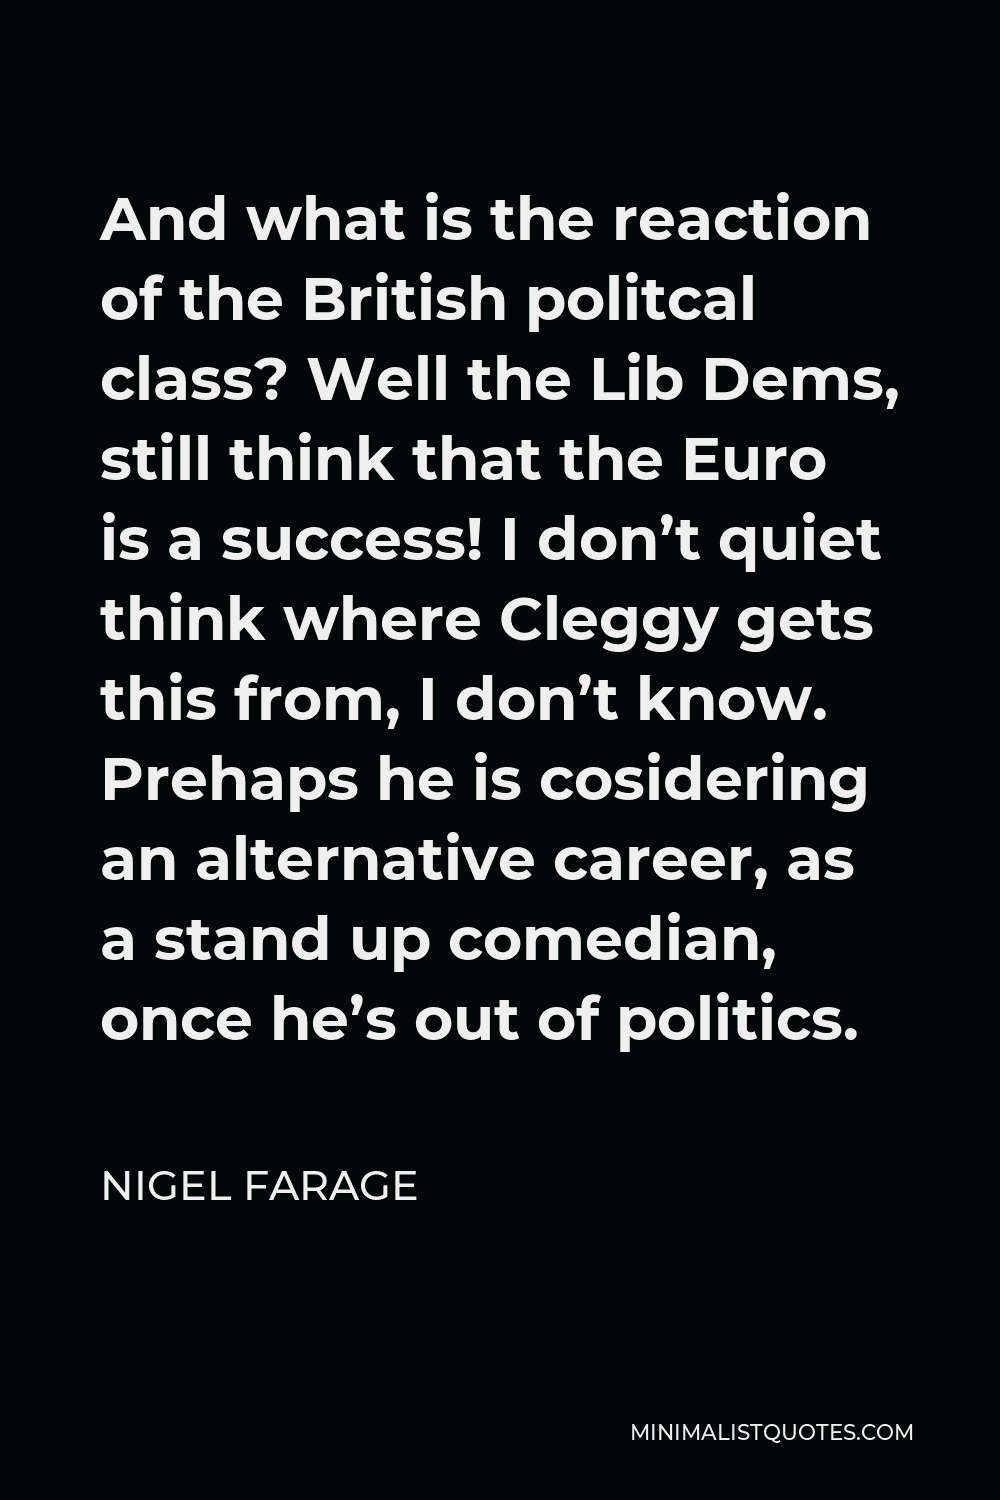 Nigel Farage Quote - And what is the reaction of the British politcal class? Well the Lib Dems, still think that the Euro is a success! I don’t quiet think where Cleggy gets this from, I don’t know. Prehaps he is cosidering an alternative career, as a stand up comedian, once he’s out of politics.